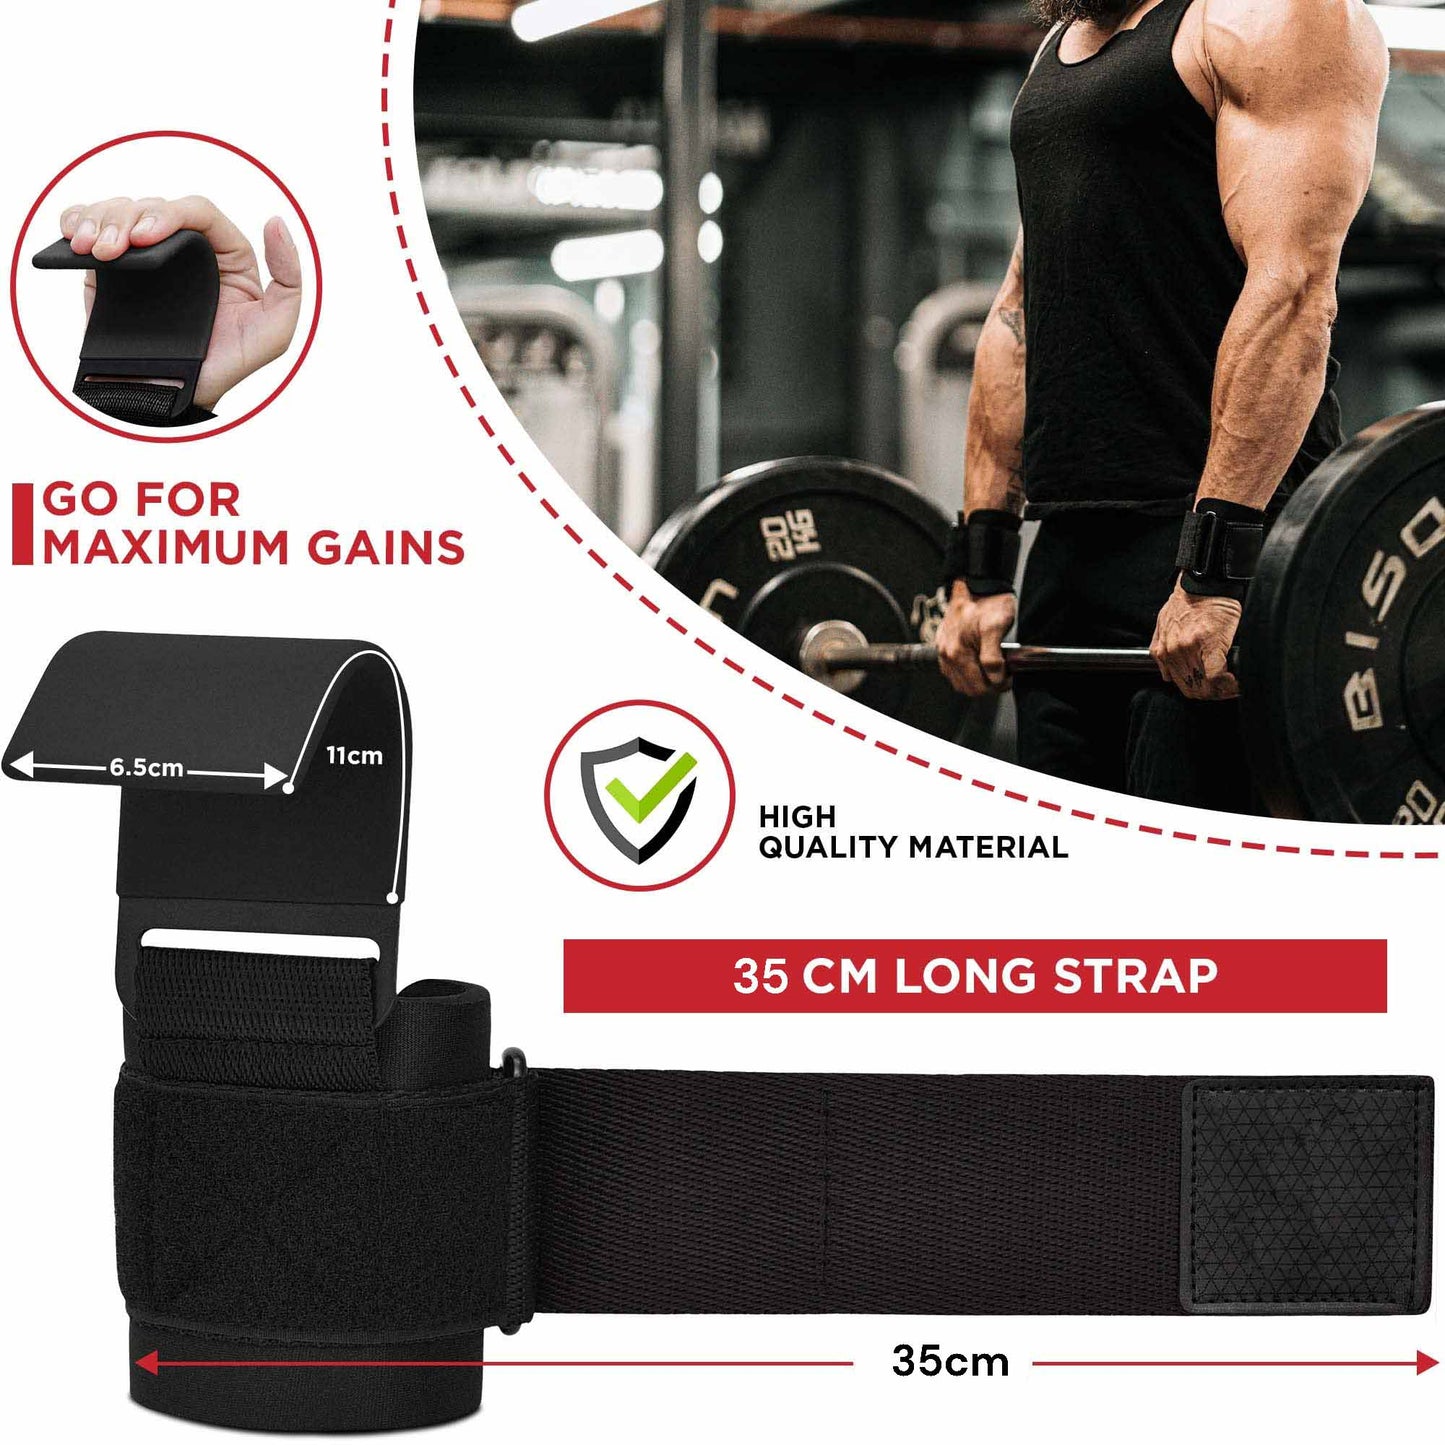 Pair Weight Lifting Hooks Straps Grip Wrist Wrap Support Powerlifting Deadlift Pull Up